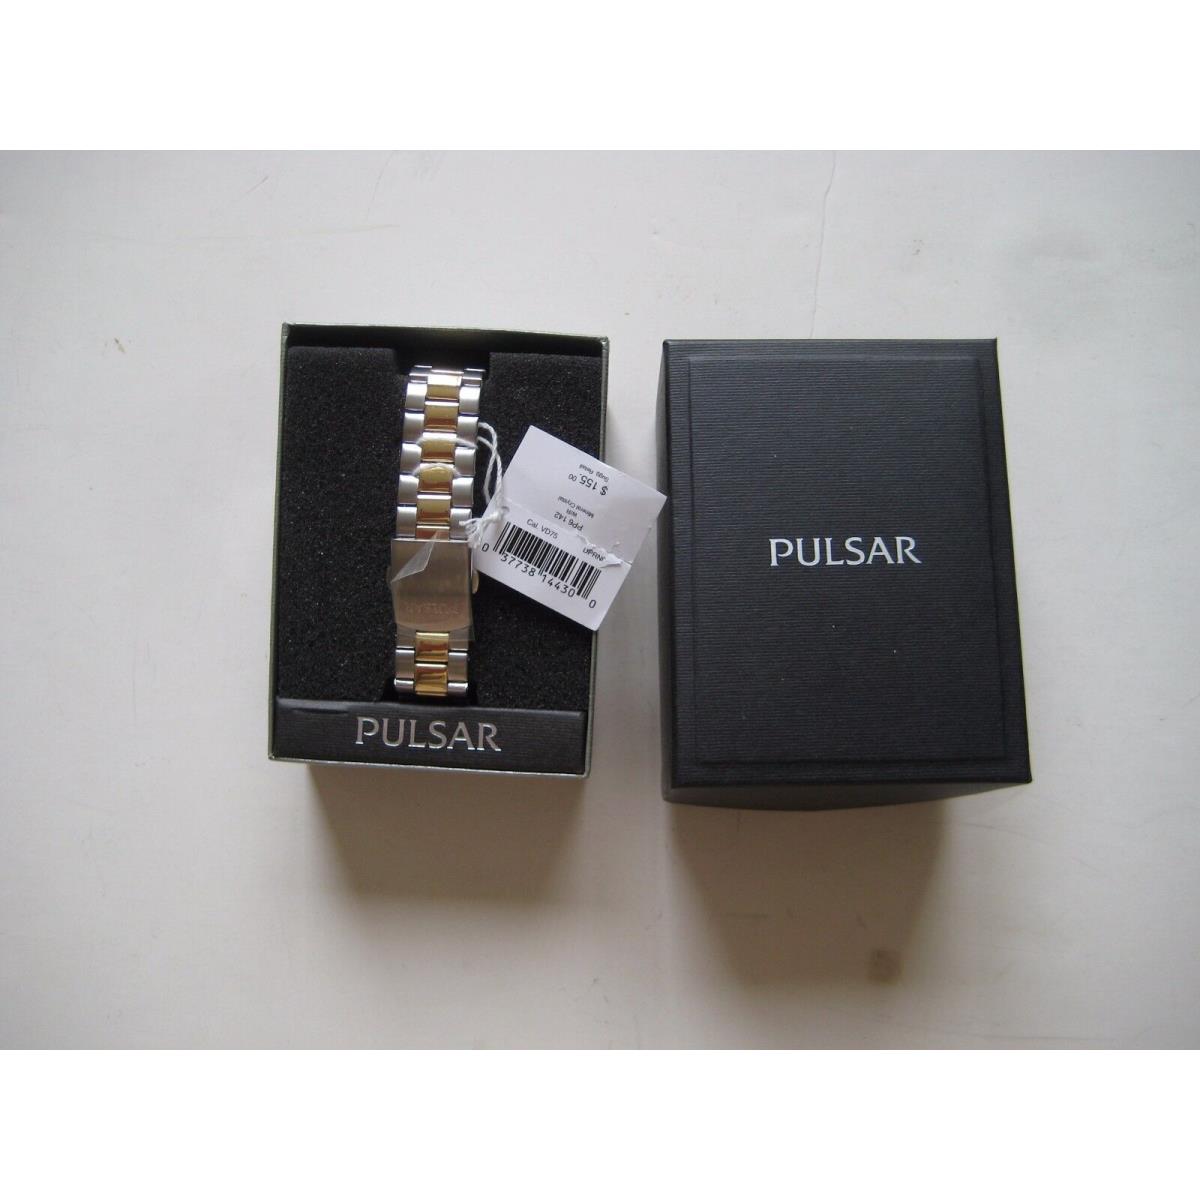 Pulsar Chronograph Two Tone Watch - PP6 142 - Retail